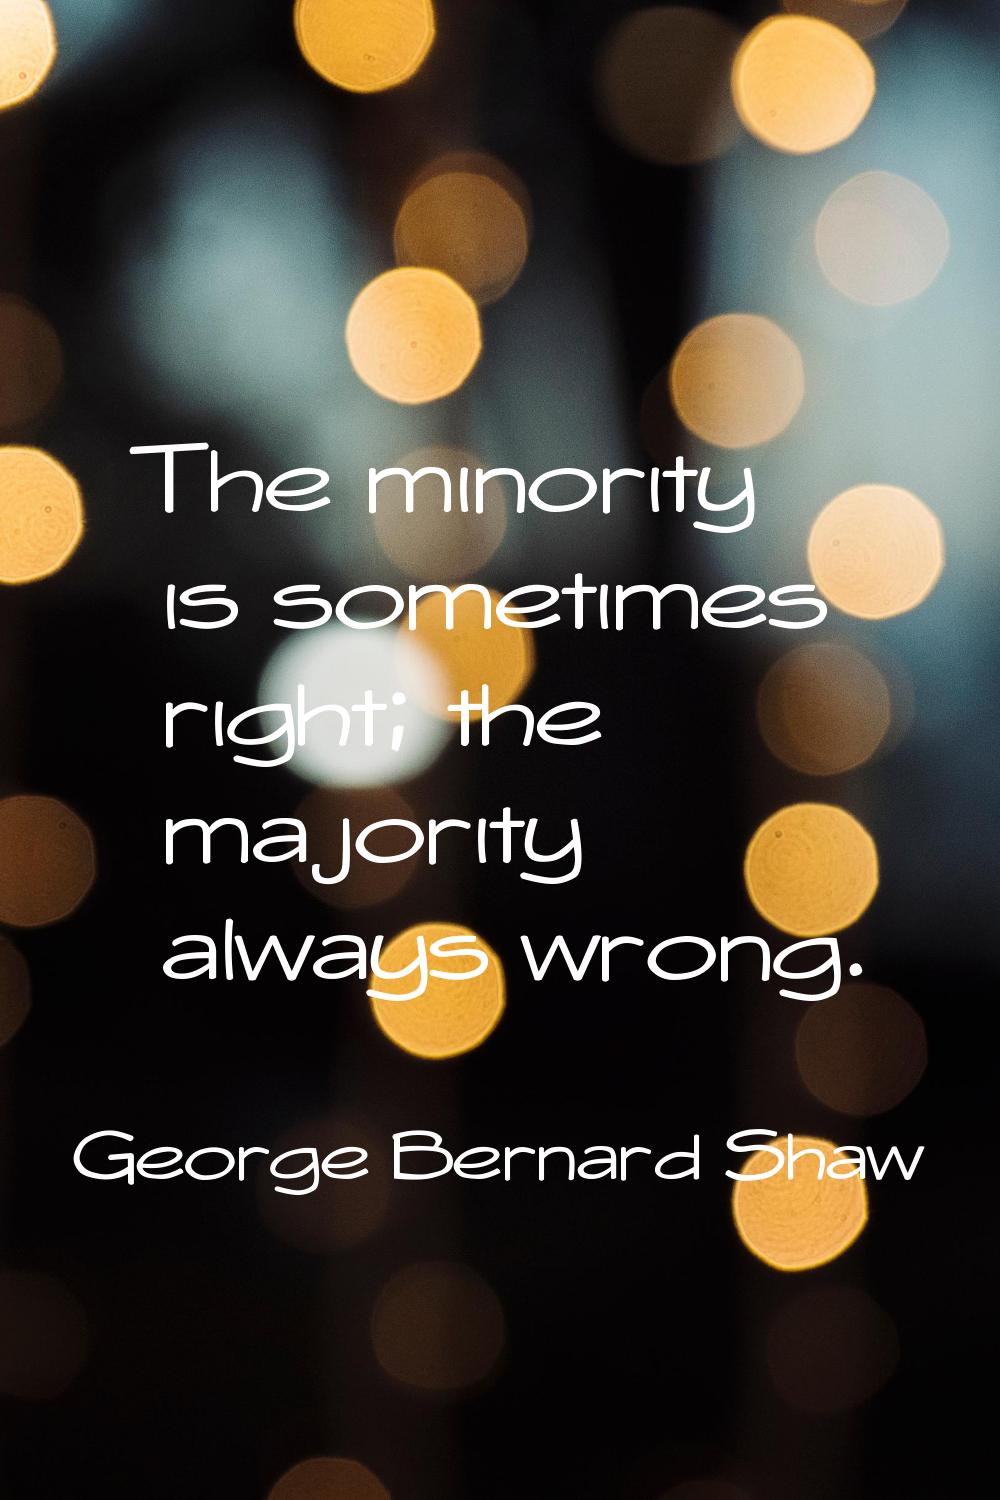 The minority is sometimes right; the majority always wrong.